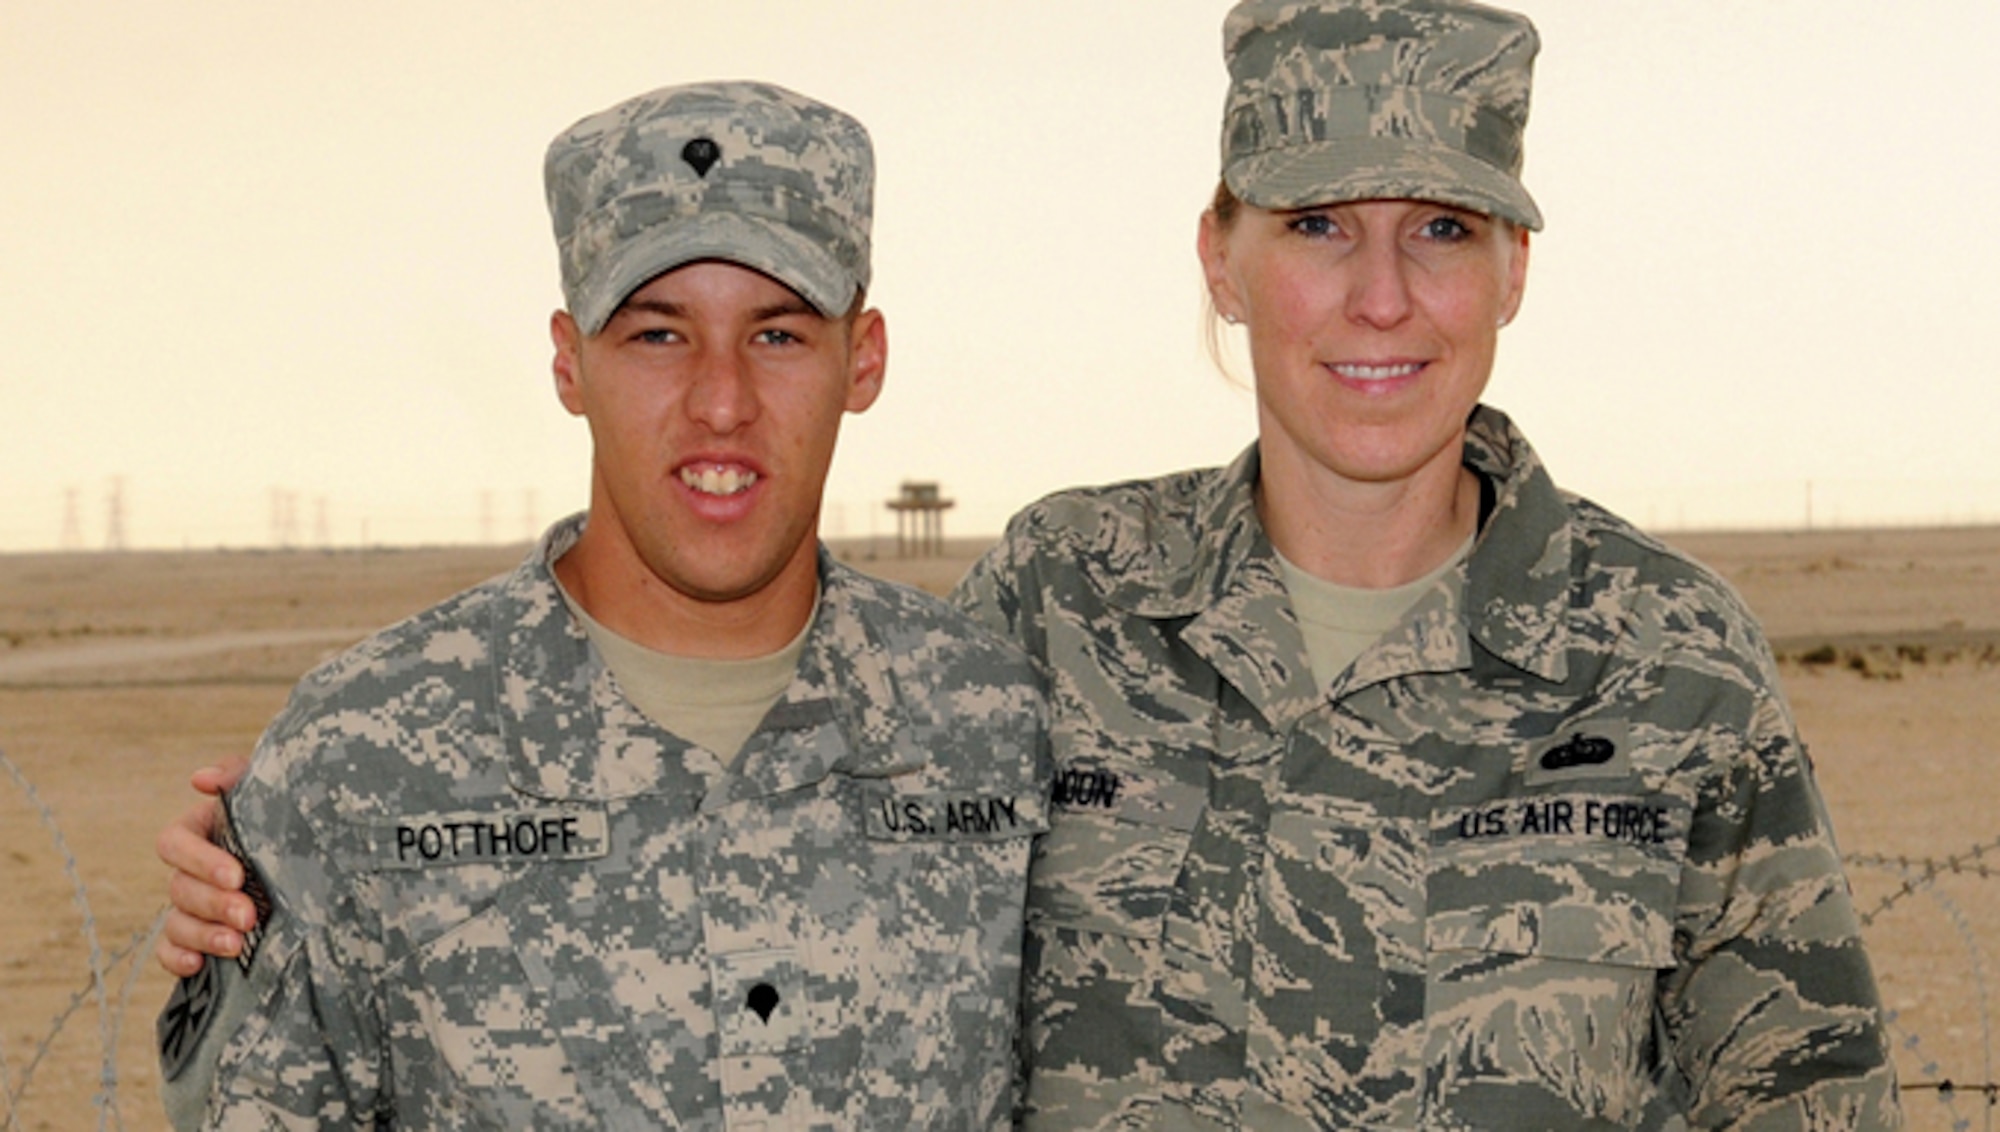 Master Sgt. Shanda Moon and her nephew, Army Spc. Alec Potthoff pose for a photo at their base in Southwest Asia where both are deployed. Moon is the executive assistant to the Command Chief, Air Force Central Command, and Potthoff is assigned to the 1st Battalion, 43rd Air Defense Artillery.  Moon and her nephew, Potthoff, recently had an unexpected reunion in the dining facility after more than five years apart.  